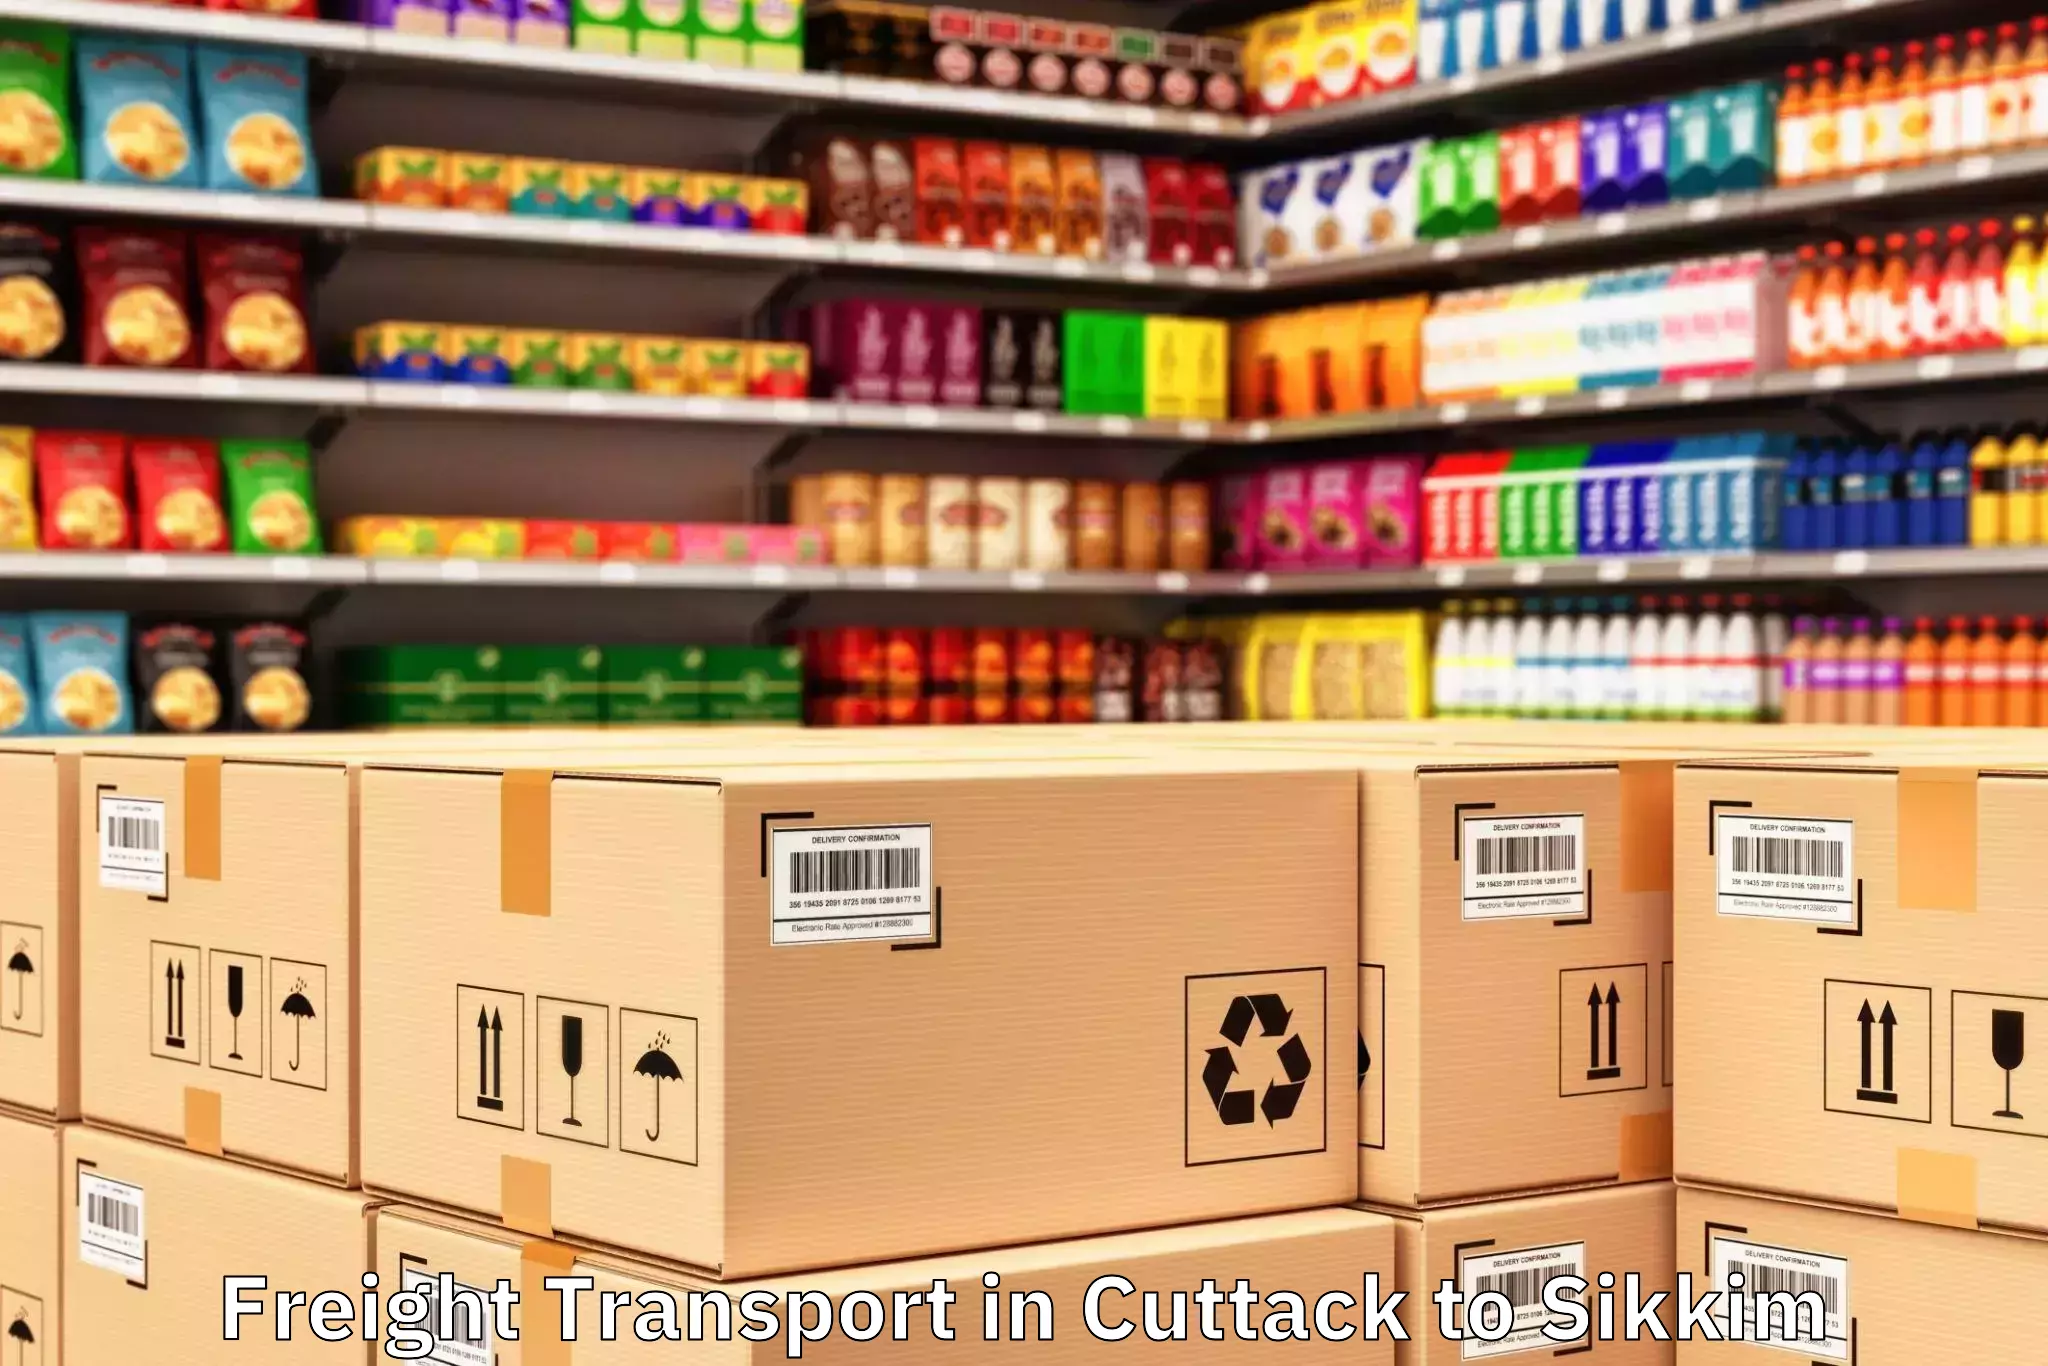 Efficient Cuttack to Gyalshing Freight Transport